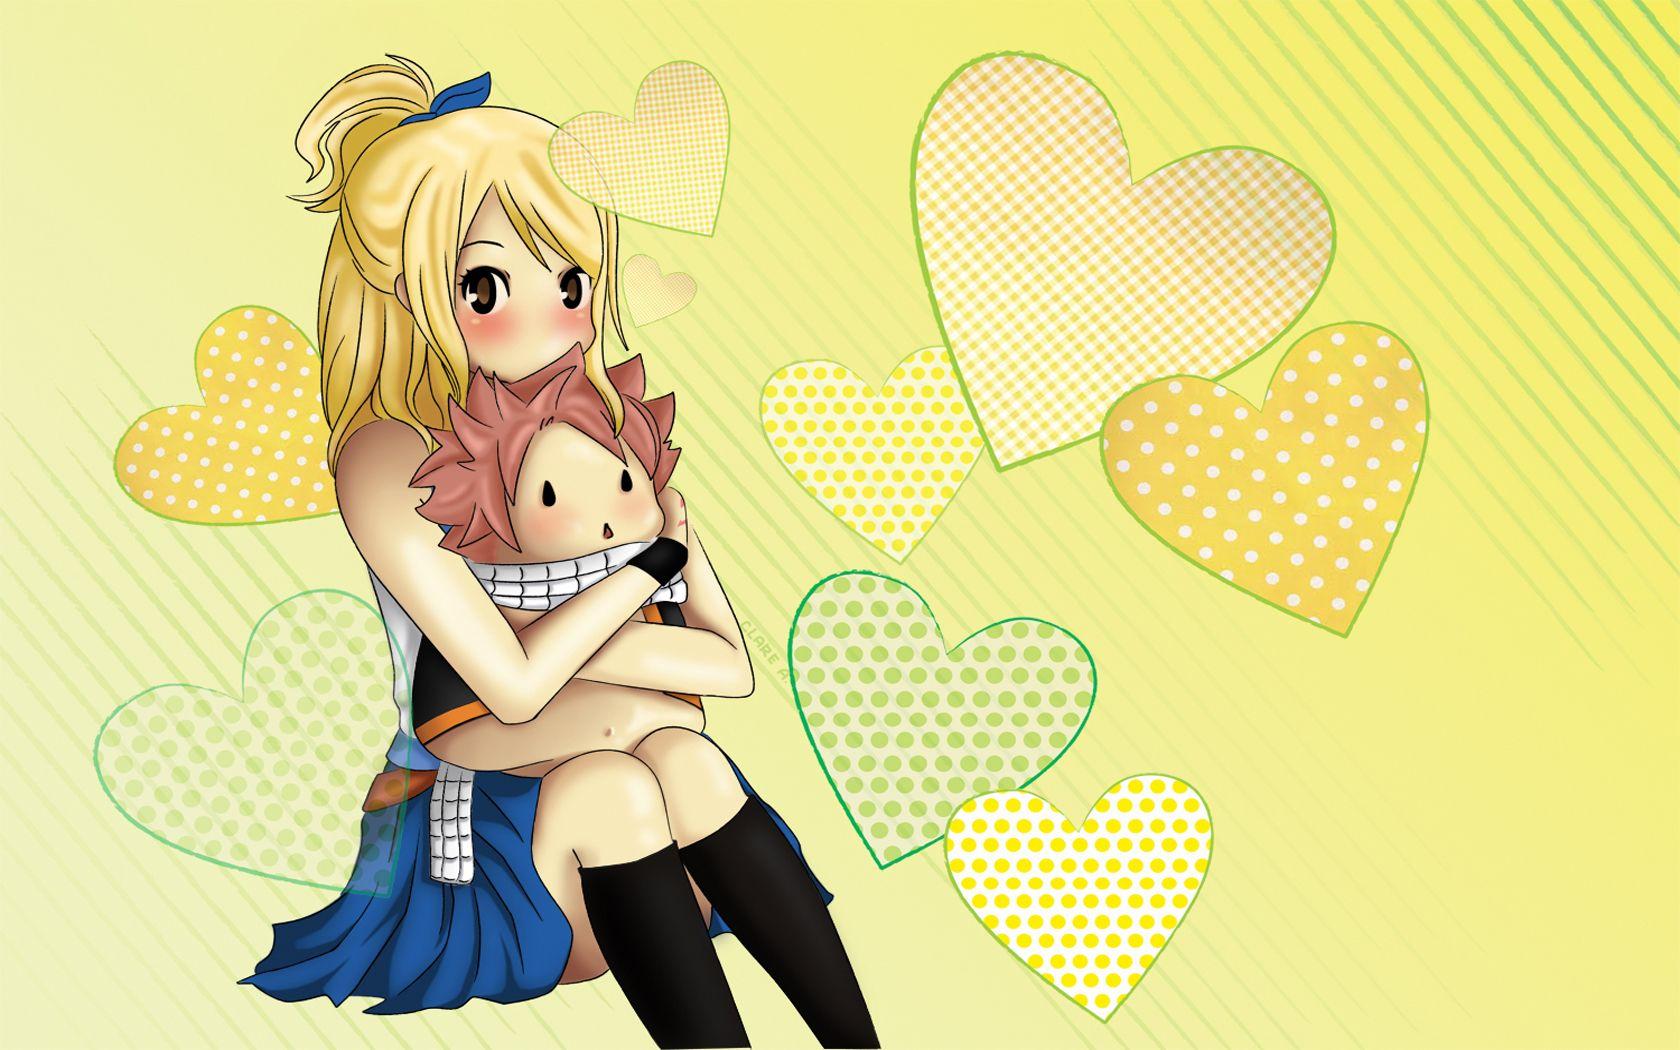 1680x1050px Lucy and Natsu Wallpaper